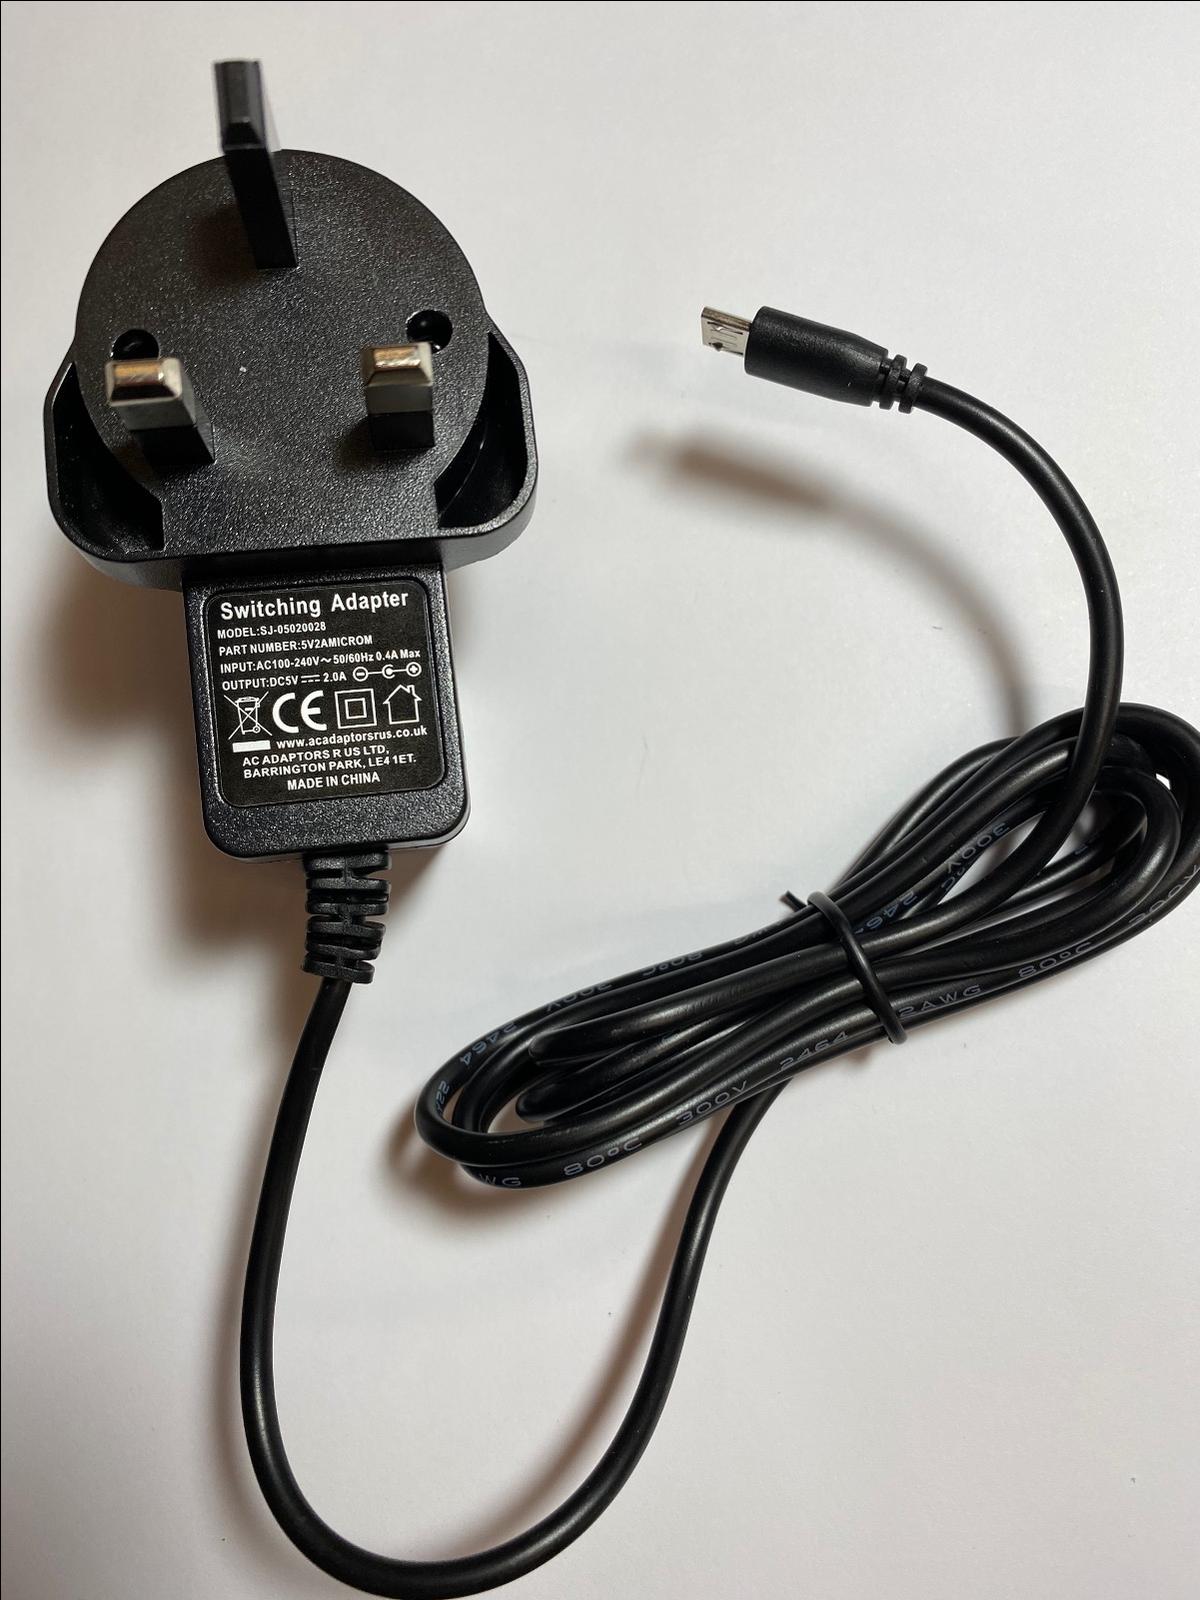 5V 2A Mains AC-DC Adaptor Charger for LINX 1010, 1020, 820, 10V32, 1010B